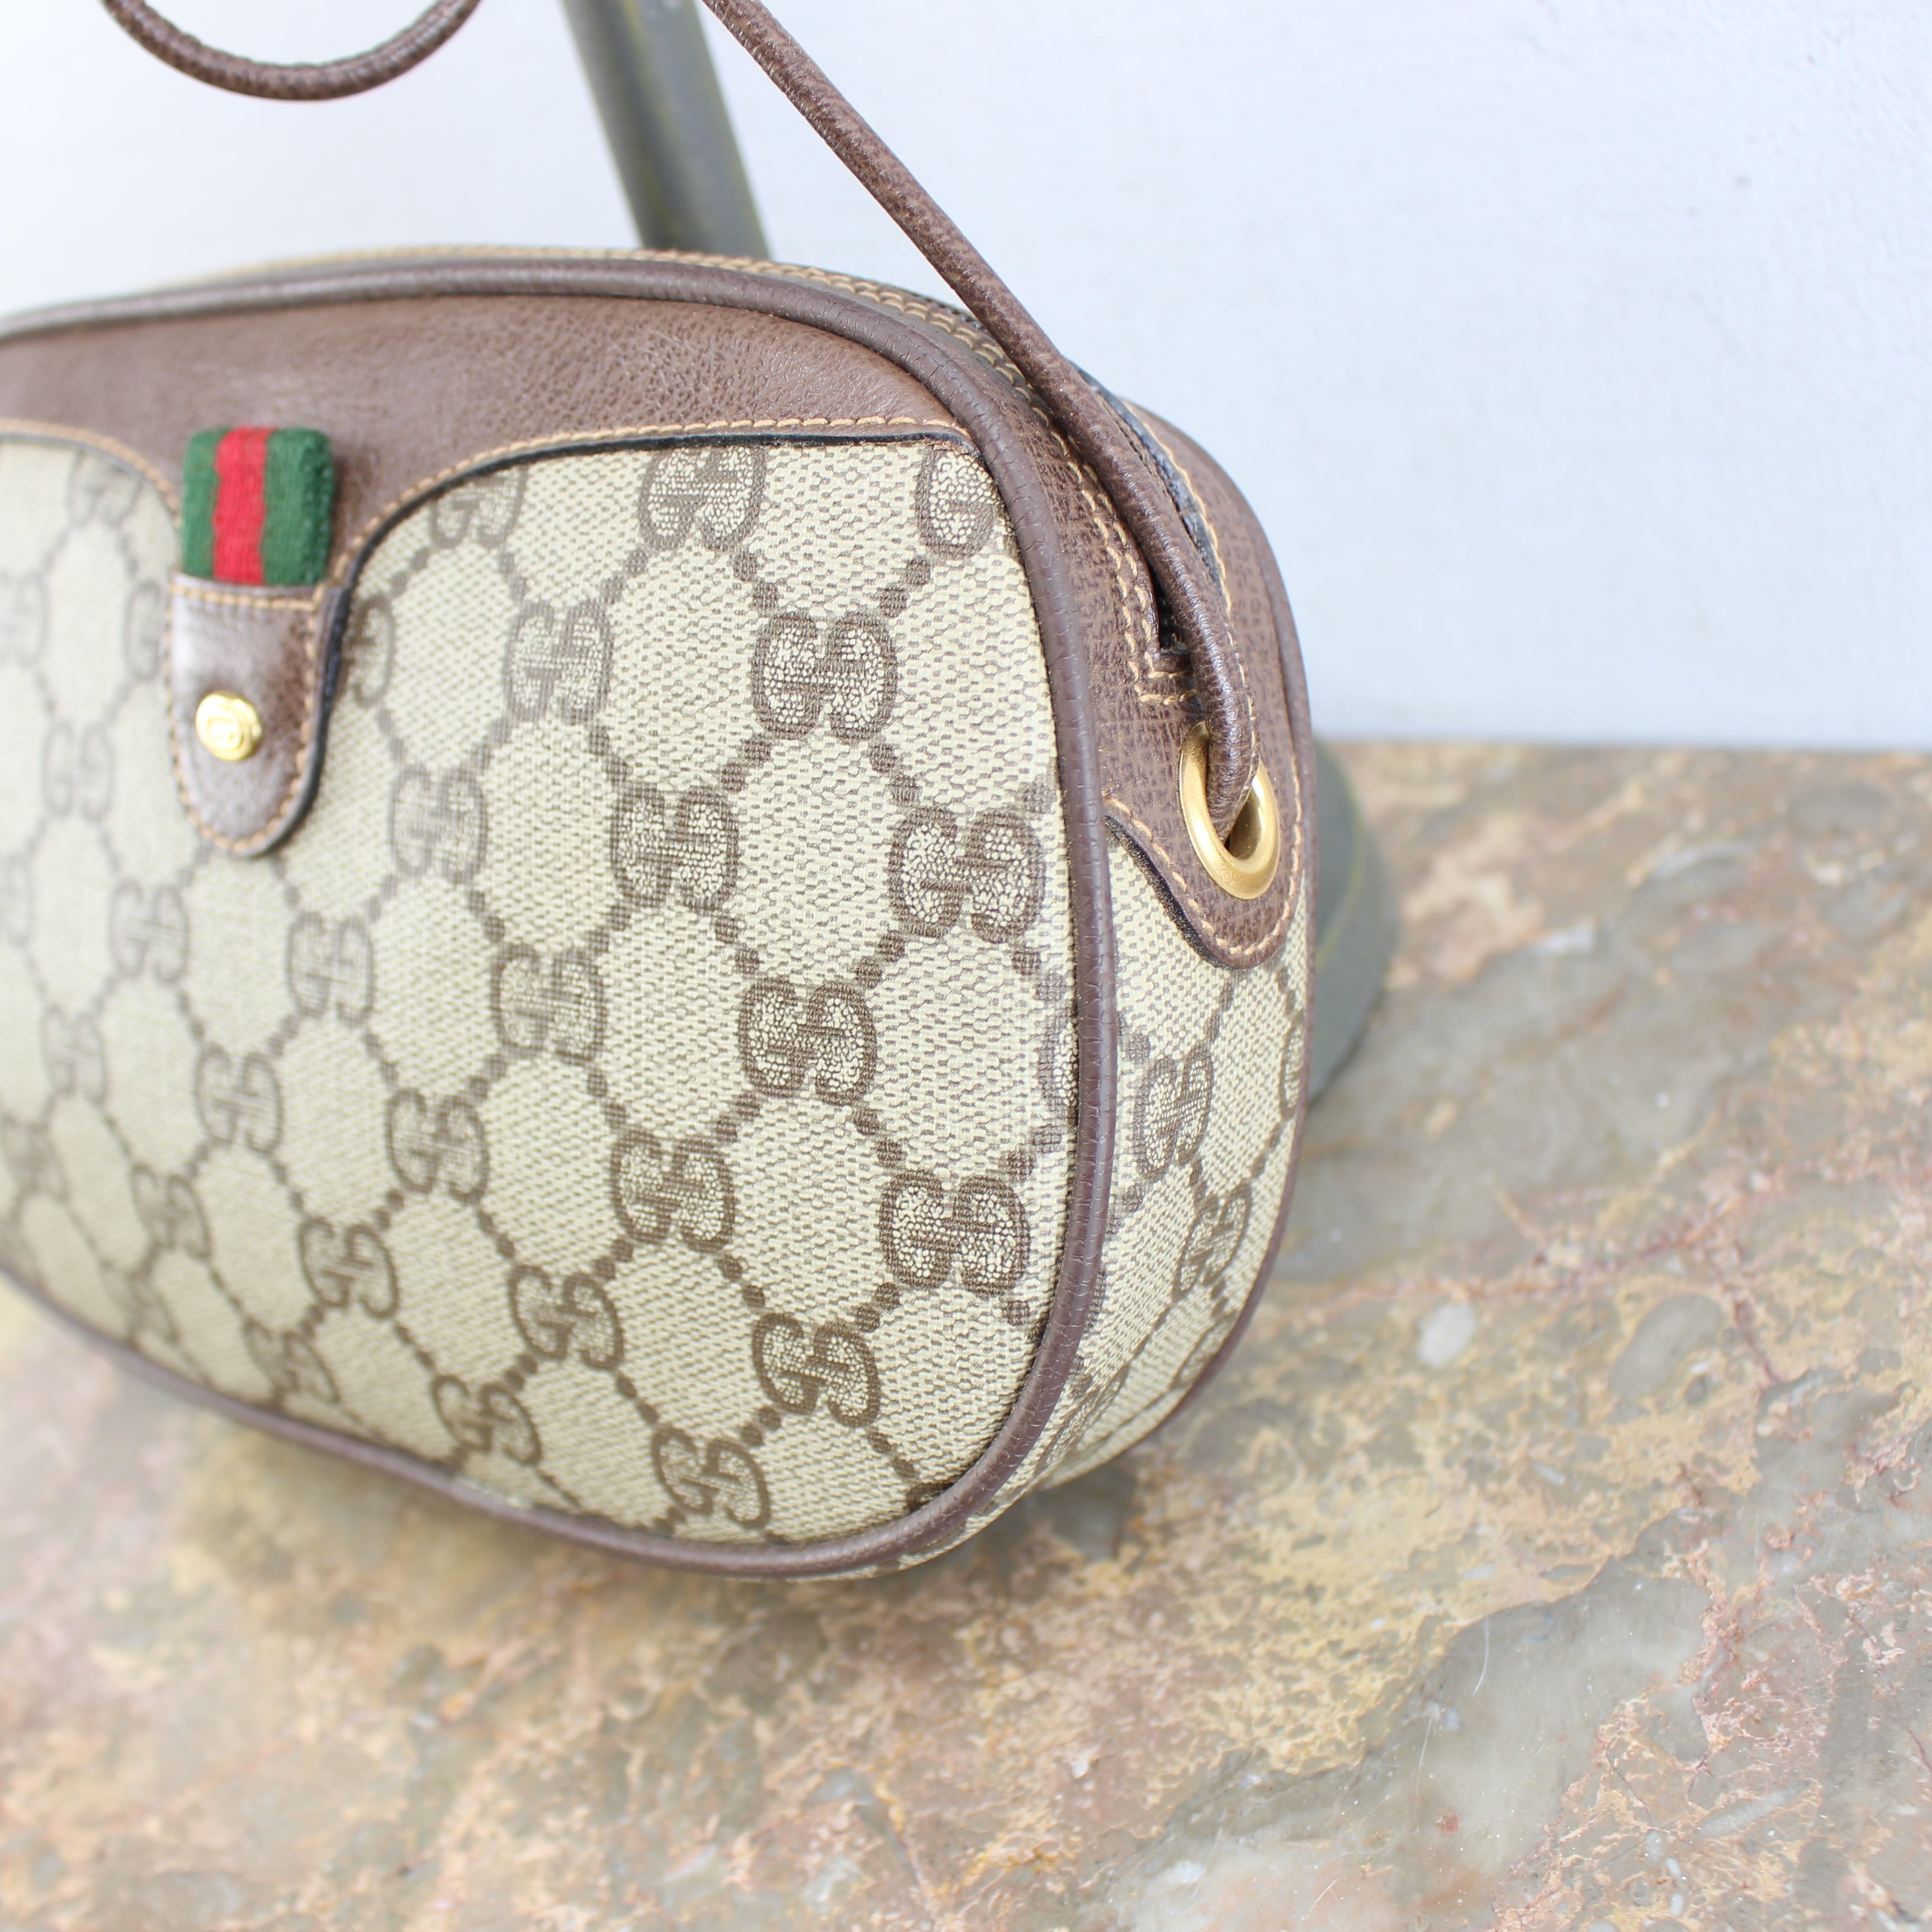 OLD GUCCI SHERRY LINE GG PATTERNED SHOULDER BAG MADE IN ITALY 